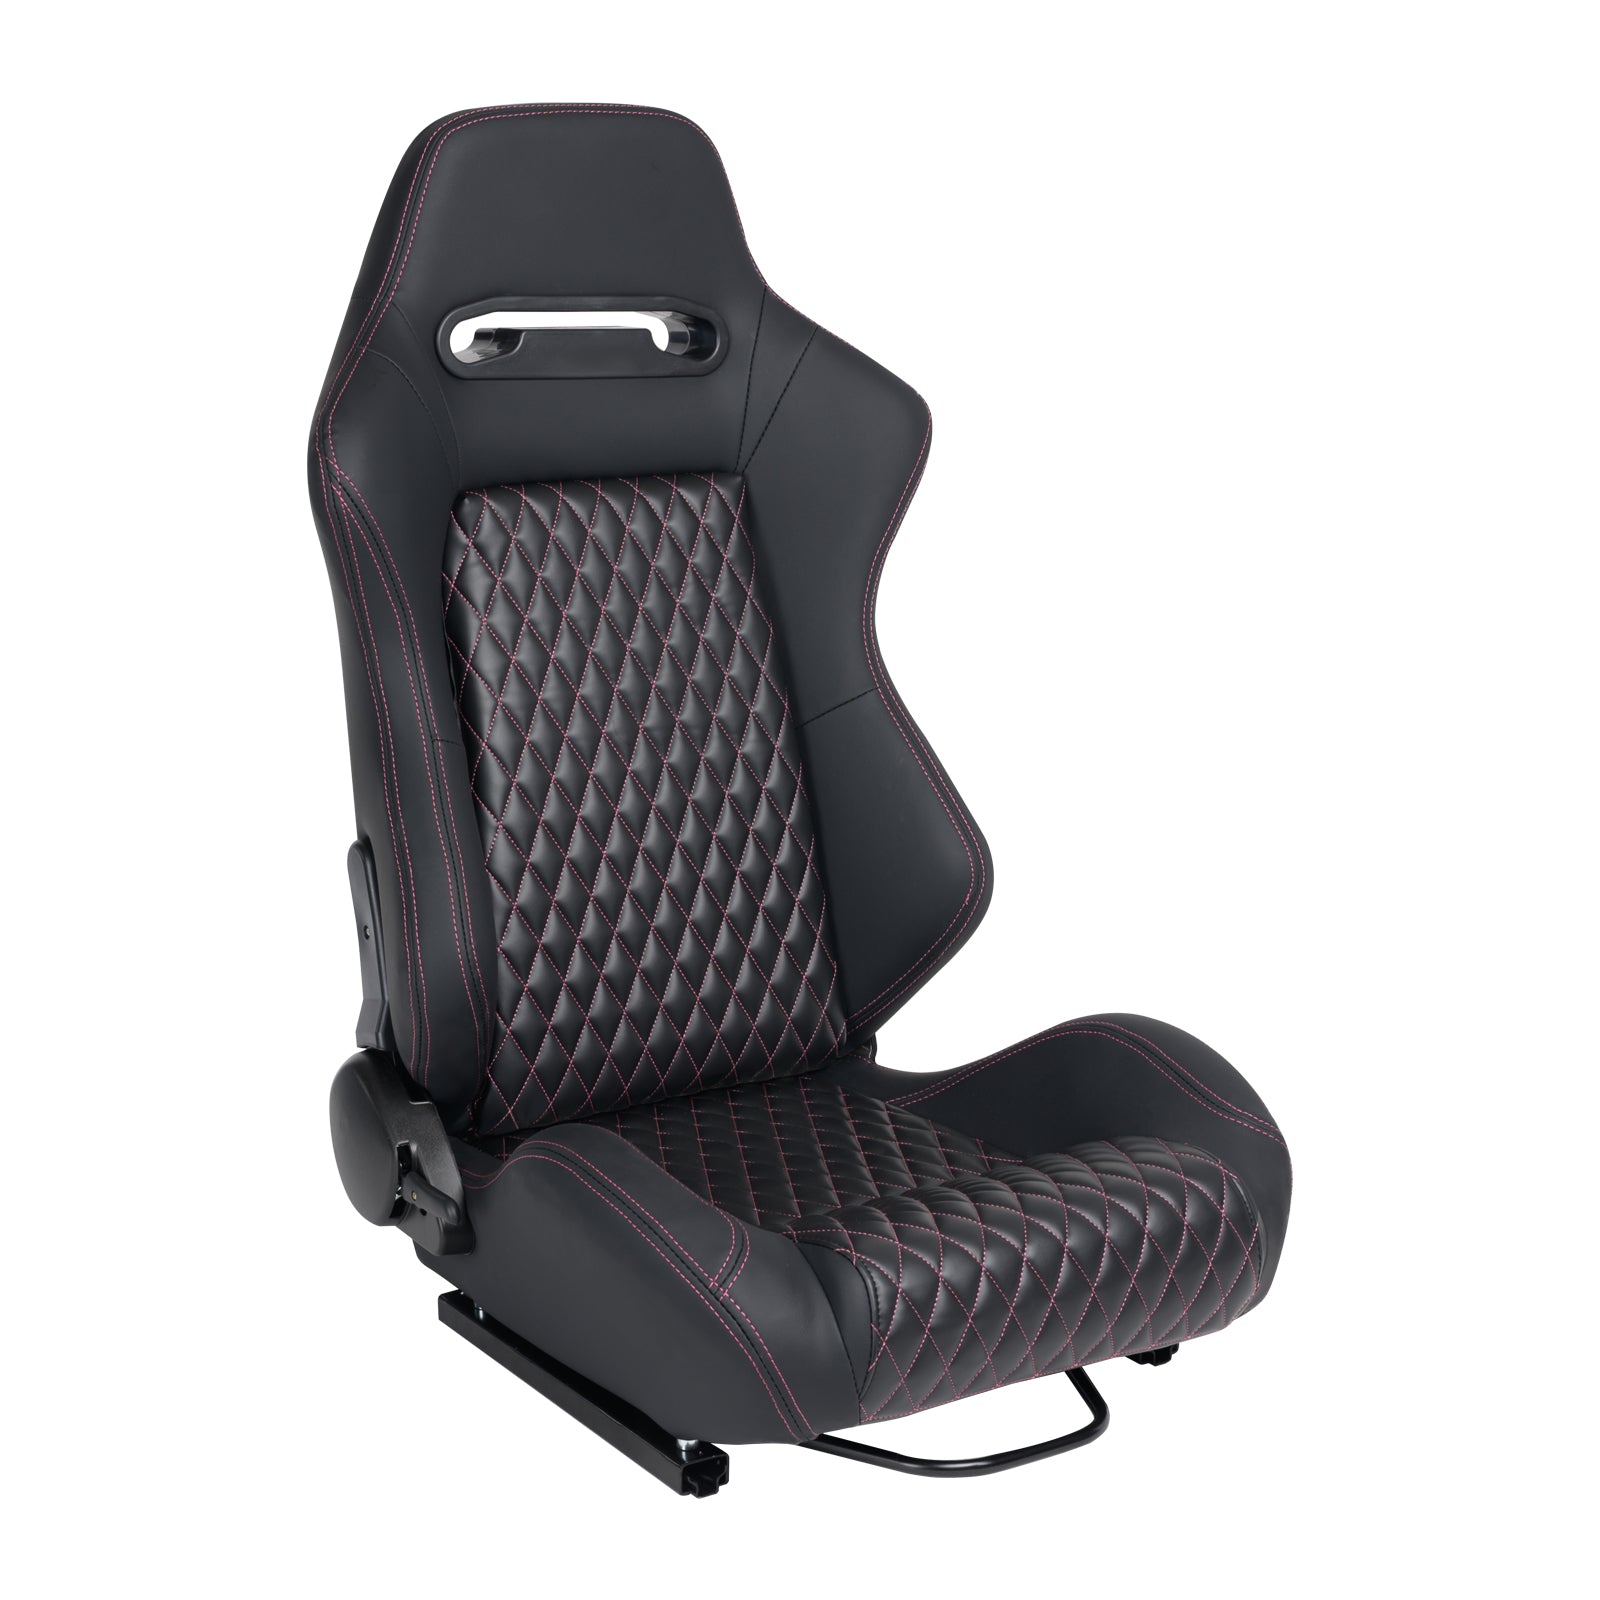 Racing Seat High Quality Pvc With Suade Material